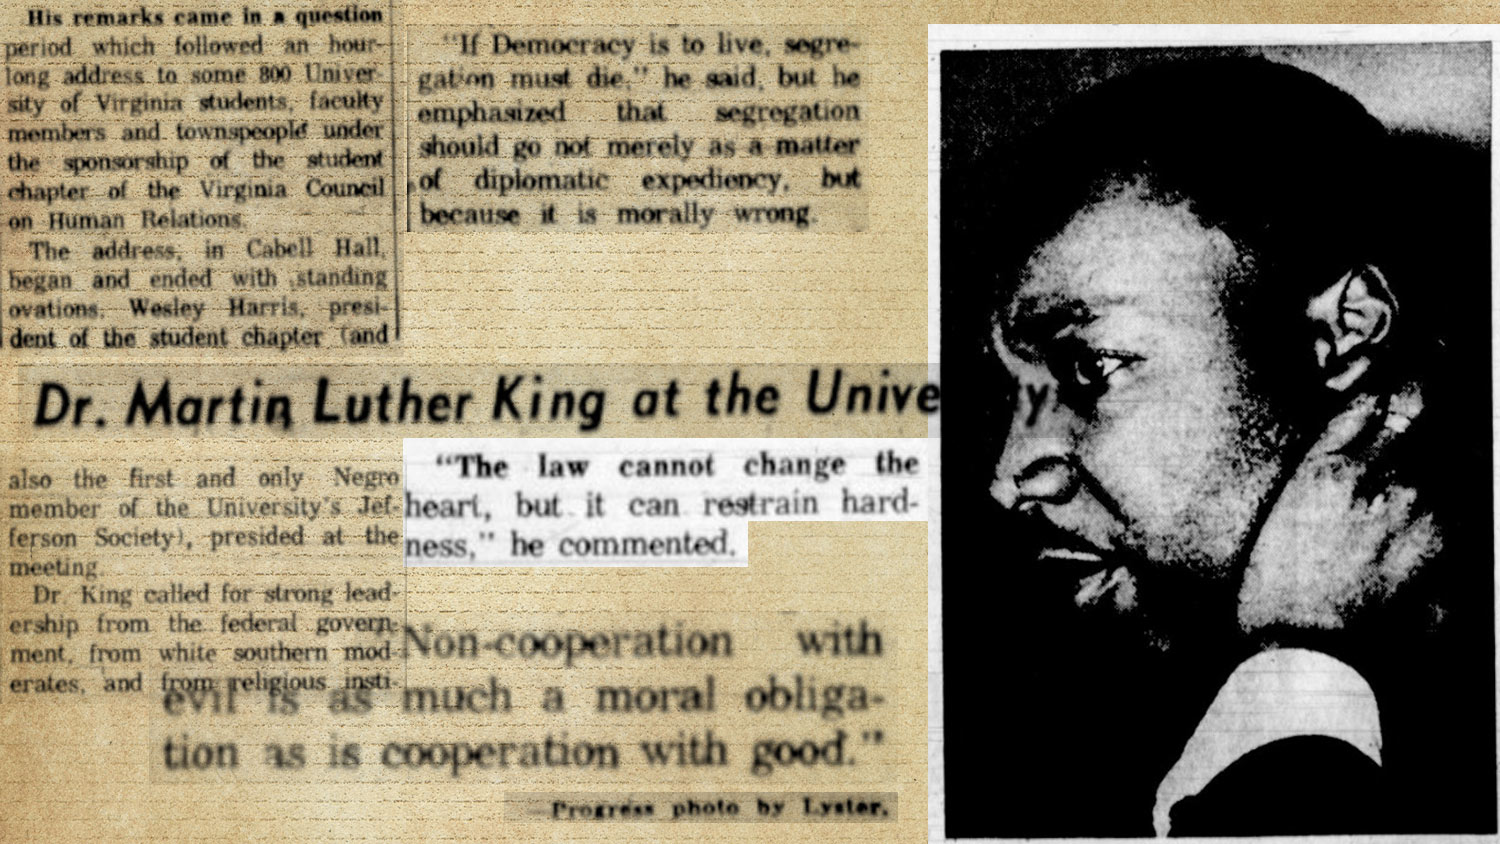 News clippings about Martin Luther King at UVA